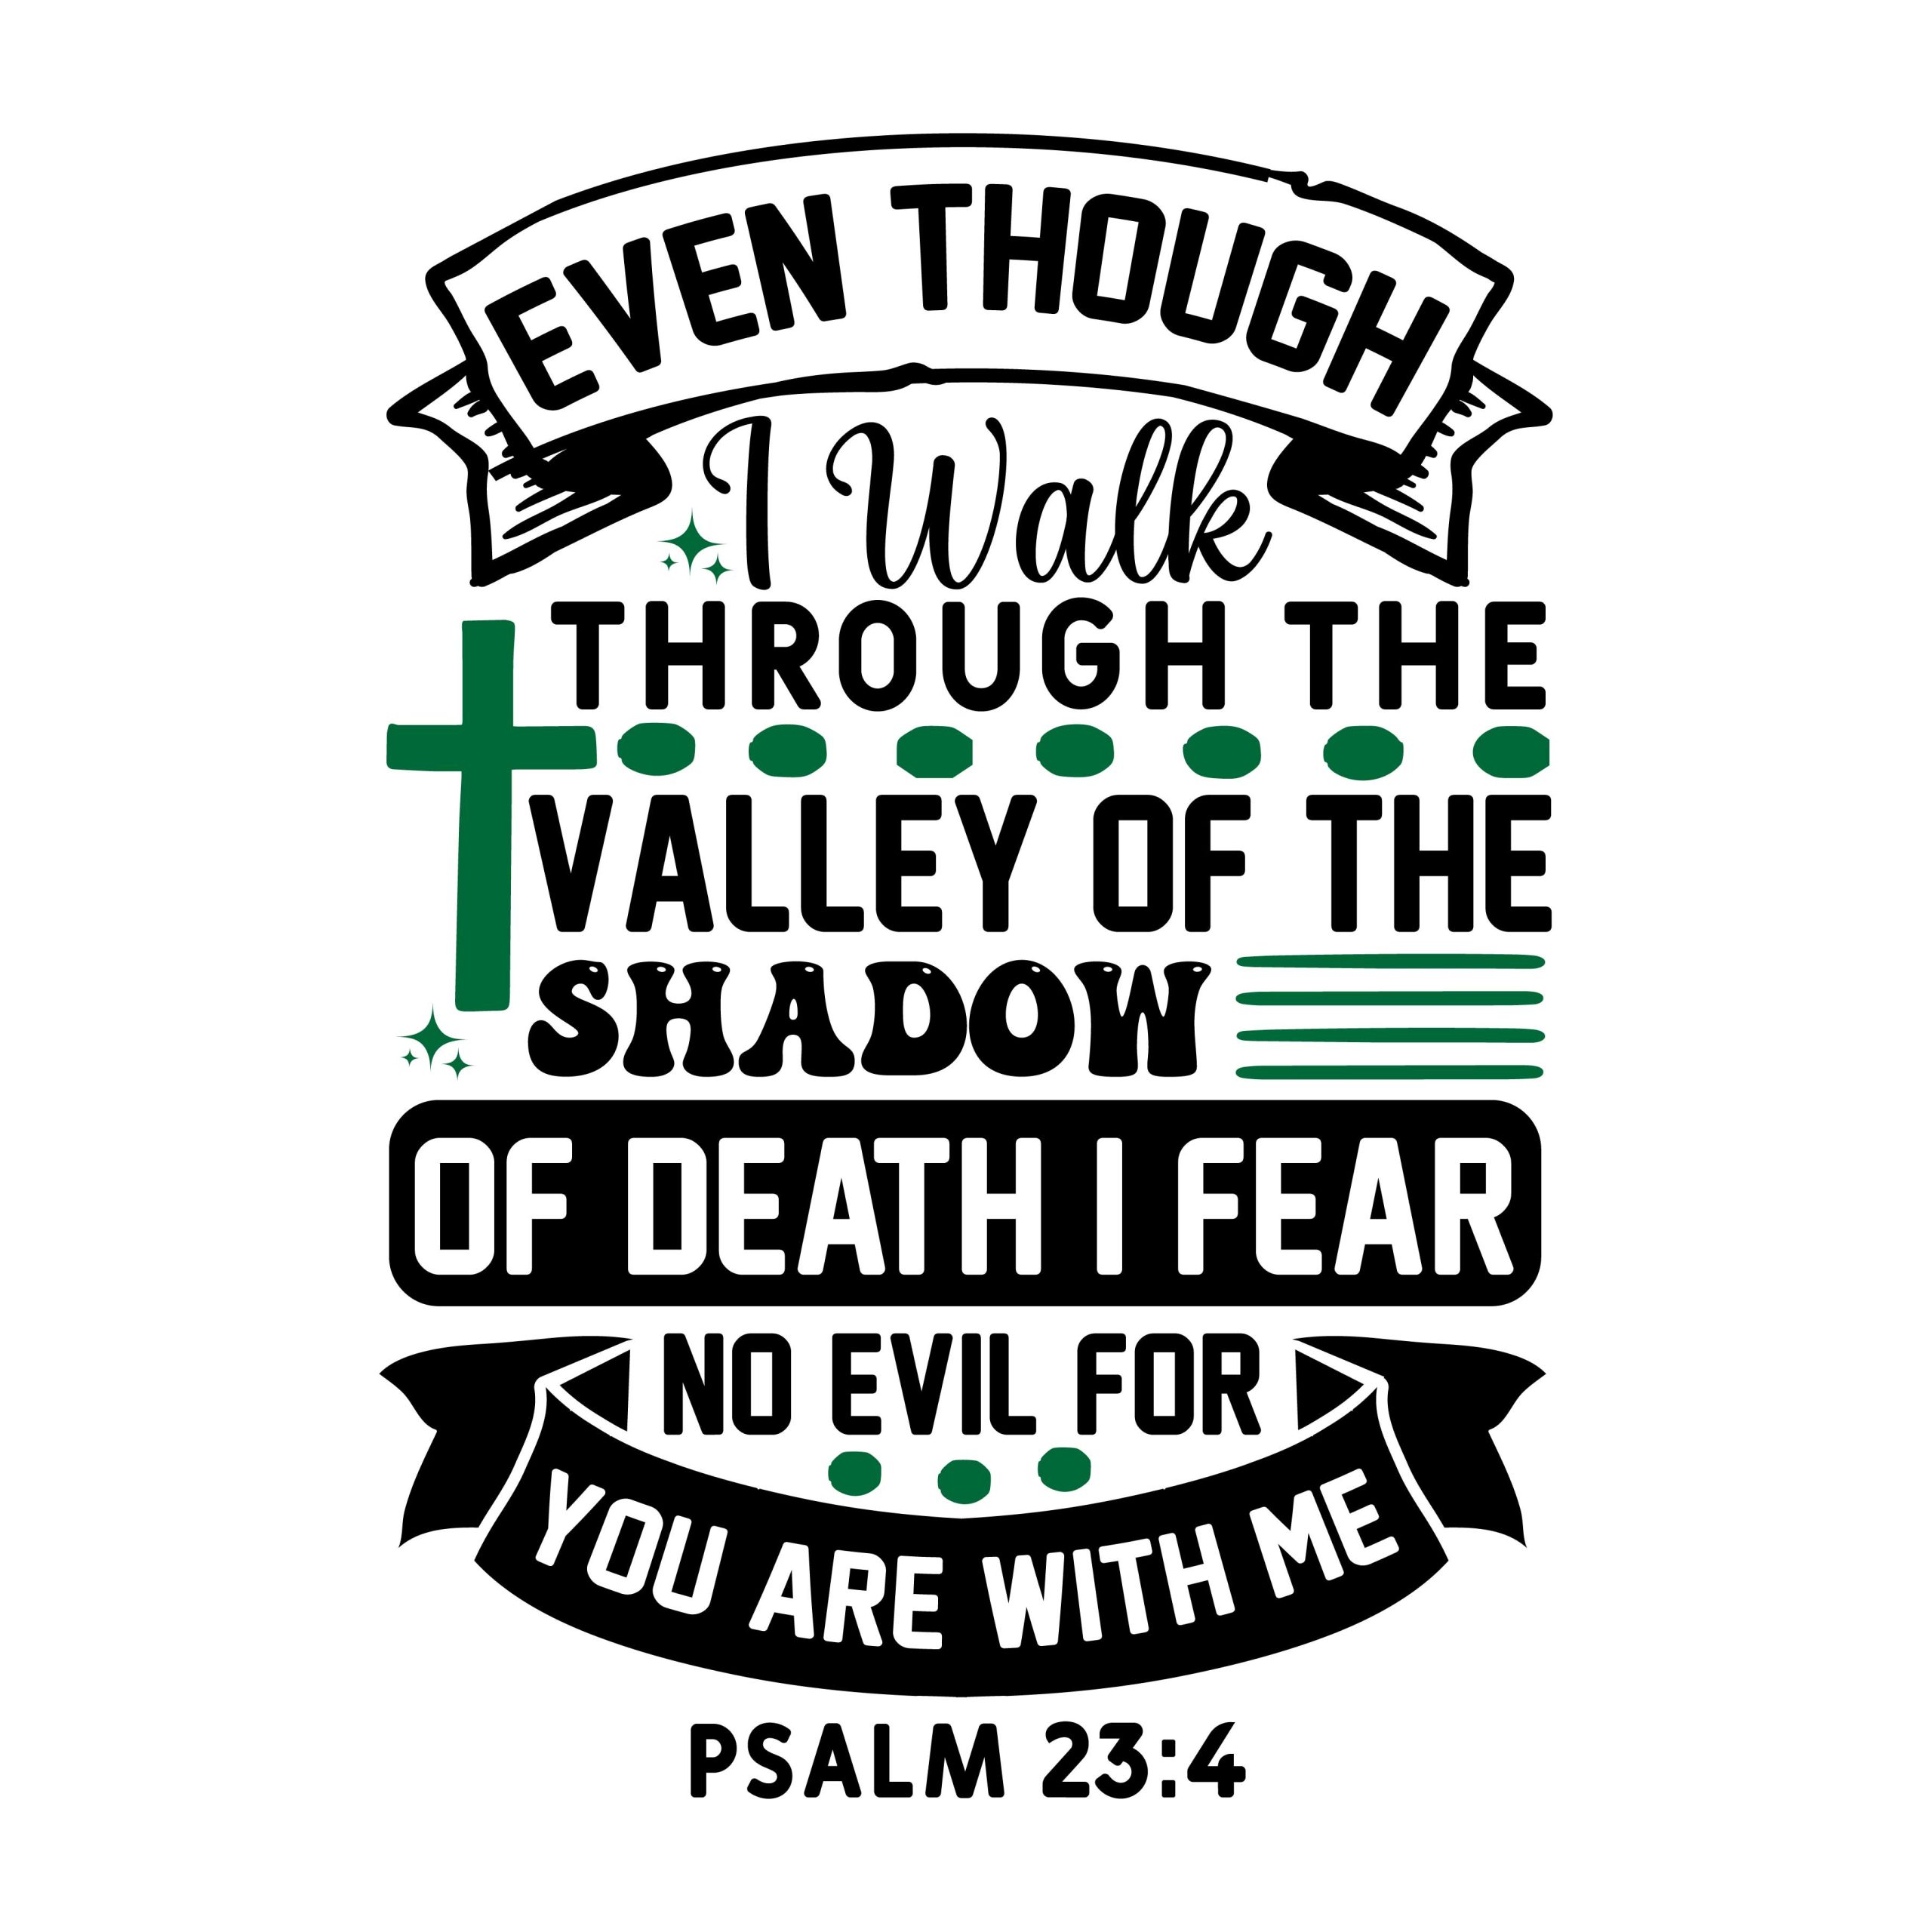 Even though i walk through the valley of the shadow of death i fear no evil for you are with me psalm 23:4, bible verses, scripture verses, svg files, passages, sayings, cricut designs, silhouette, embroidery, bundle, free cut files, design space, vector